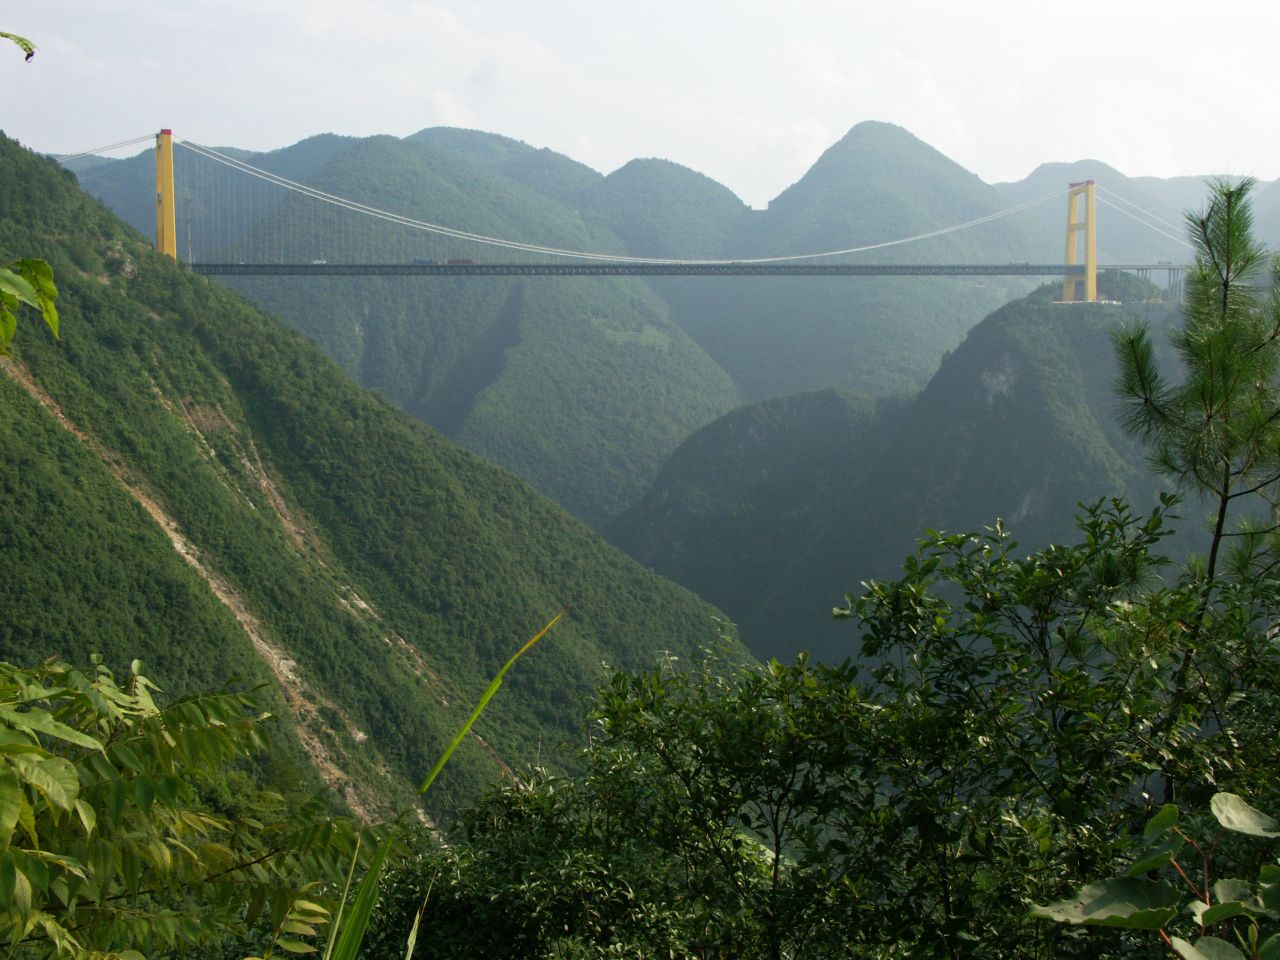 This is the highest bridge in the world. The Sidhue River Bridge hangs 1,627 feet (496 meters) above the water, according to highestbridges.com. It's located in China's Hubei Province, about 50 miles (80 kilometers) south of the well-known Yangtze River area called Three Gorges.